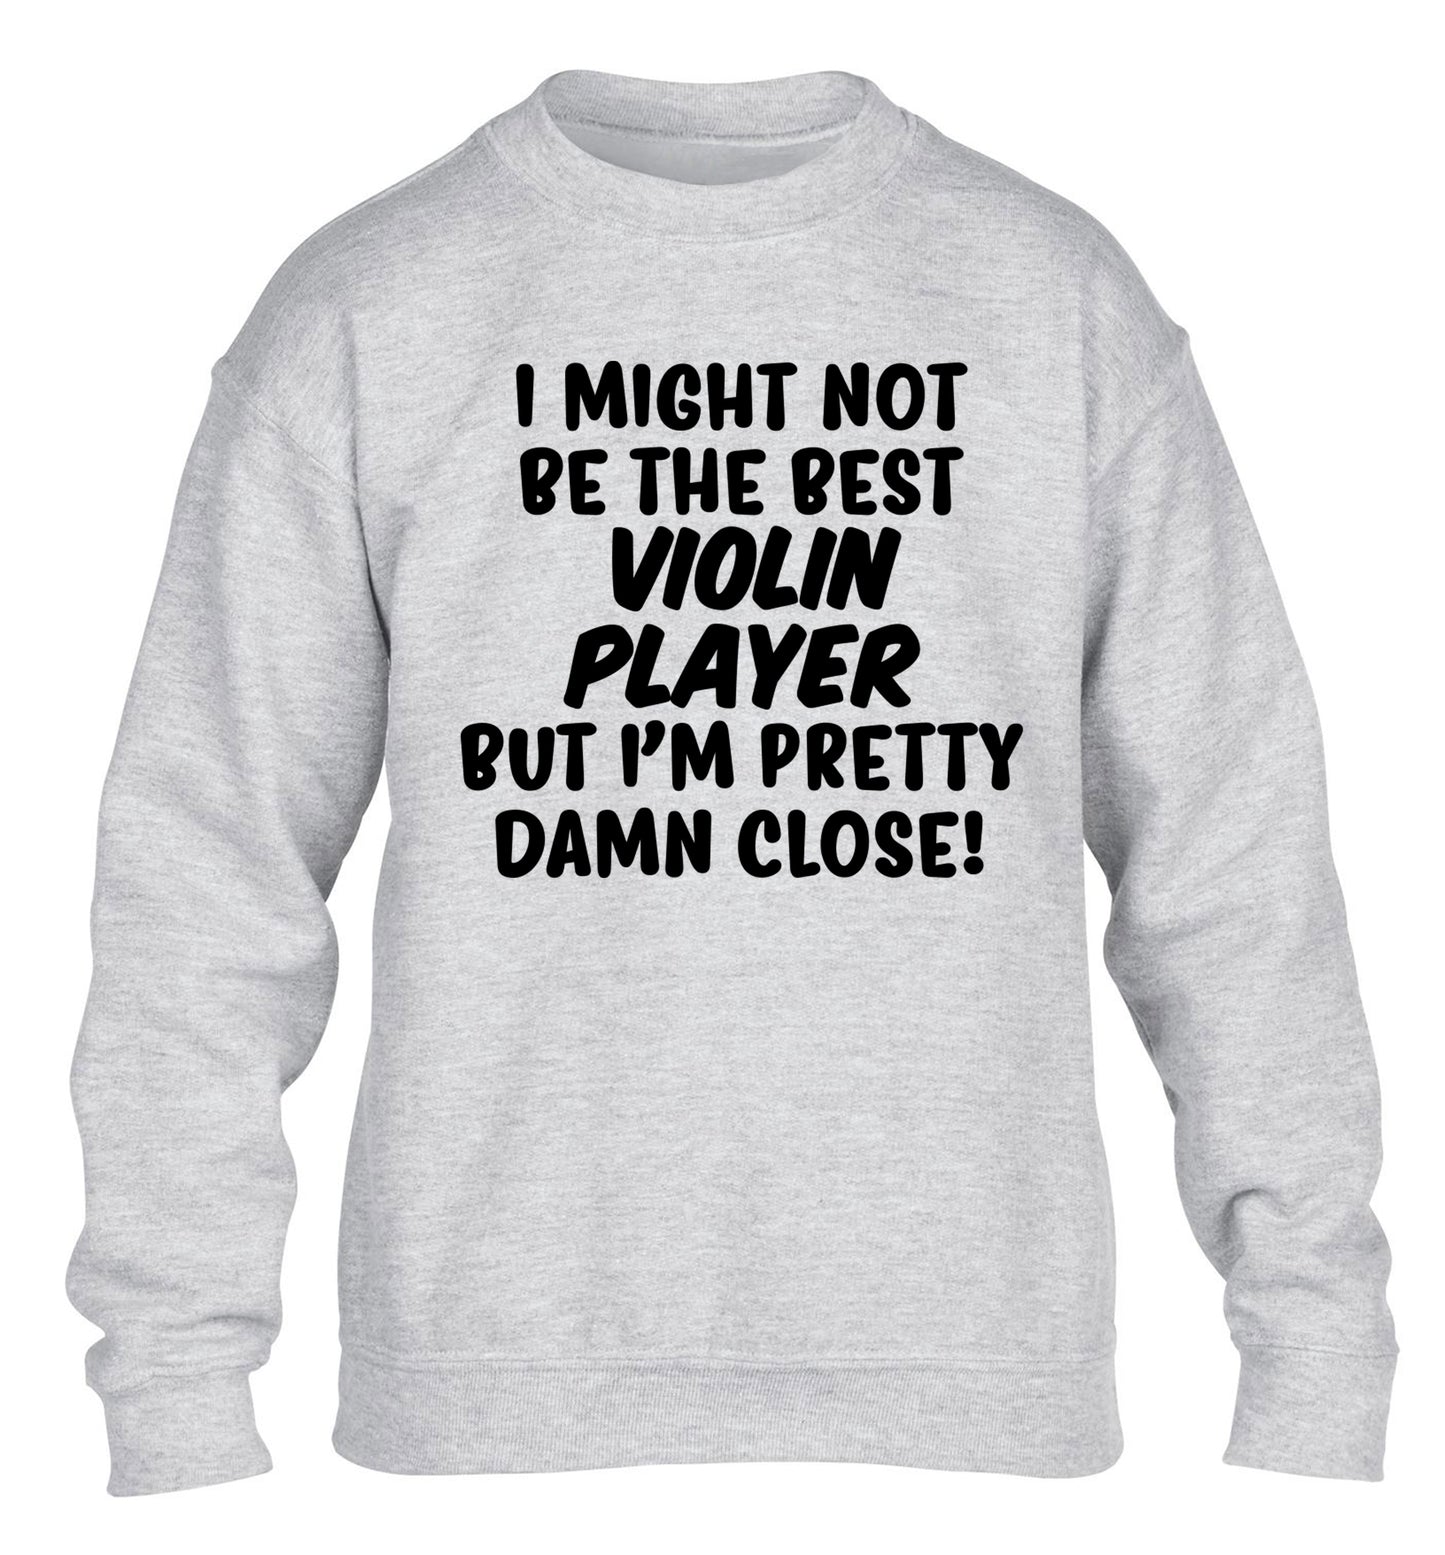 I might not be the best violin player but I'm pretty close children's grey sweater 12-13 Years